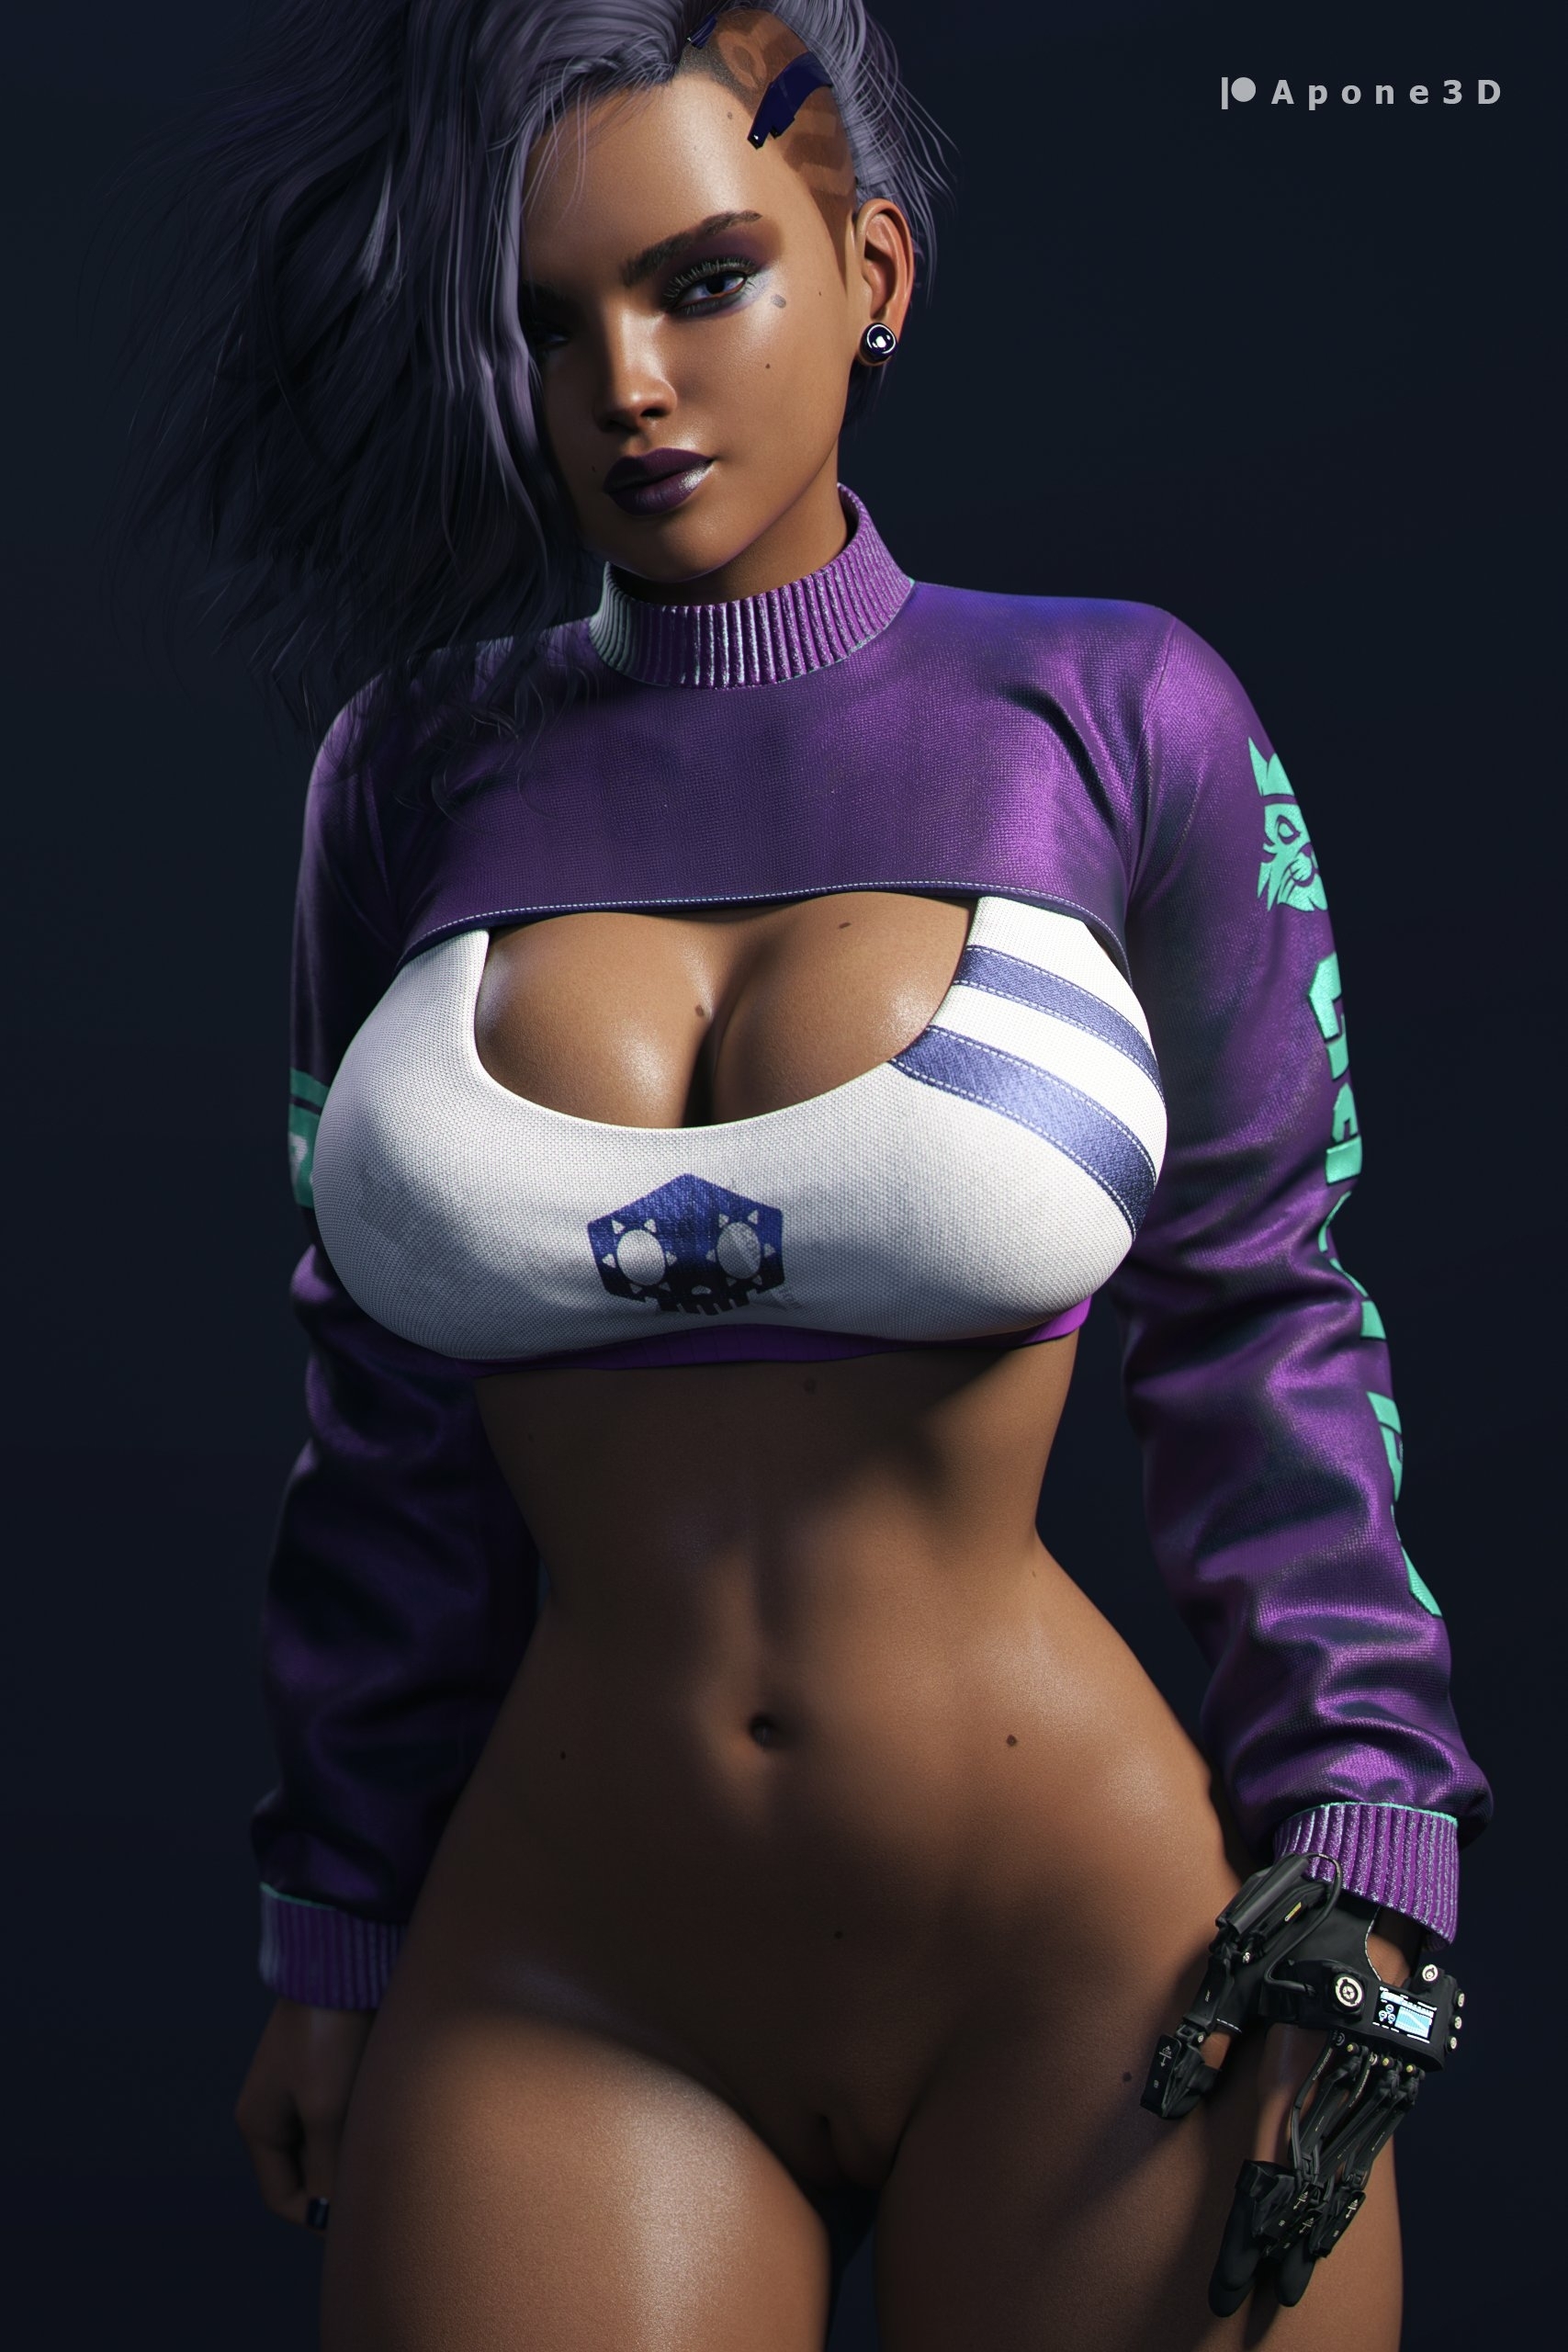 Sombra Sombra Overwatch Pussy Shaved Pussy Ass Big Ass Lingerie Sexy Lingerie Boobs Big boobs Horny Face Sexy 3d Porn